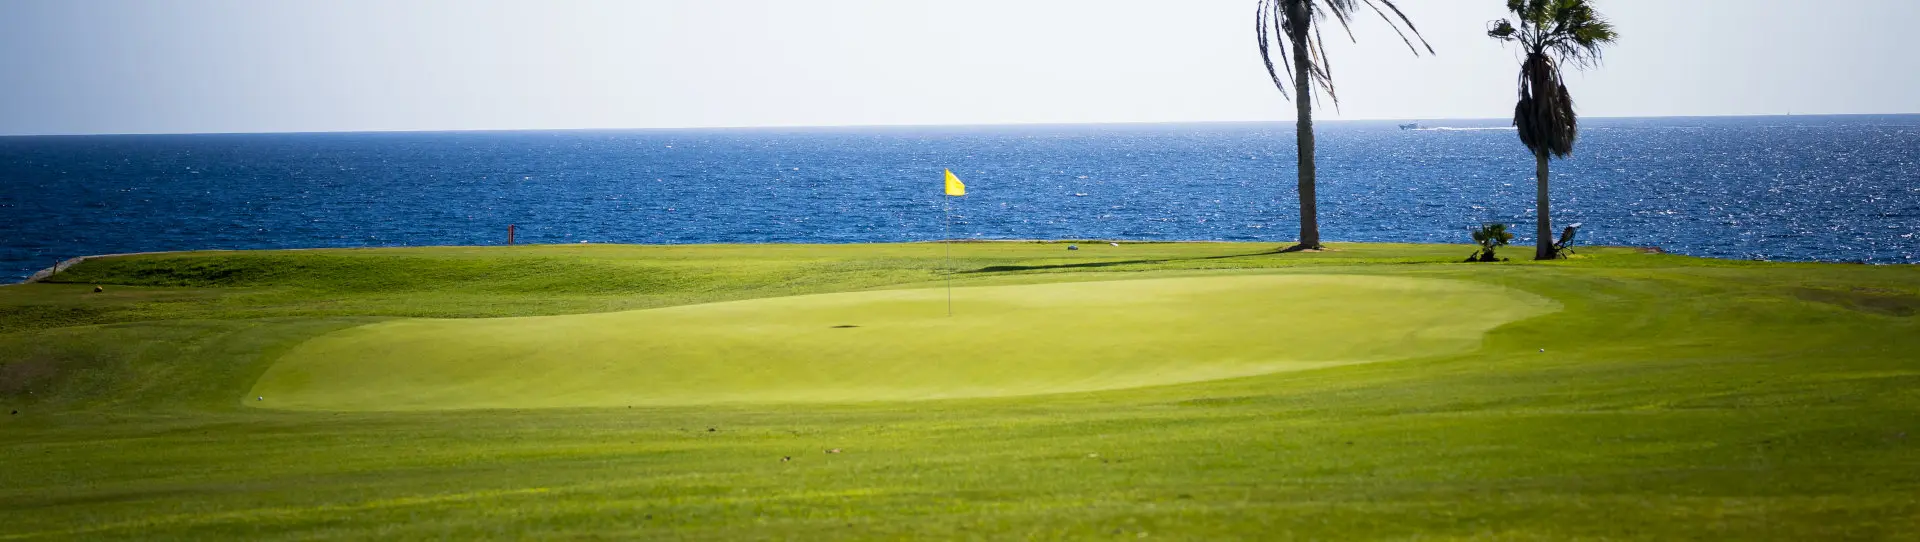 Spain golf holidays - Amarilla Five Rounds Experience - Photo 1